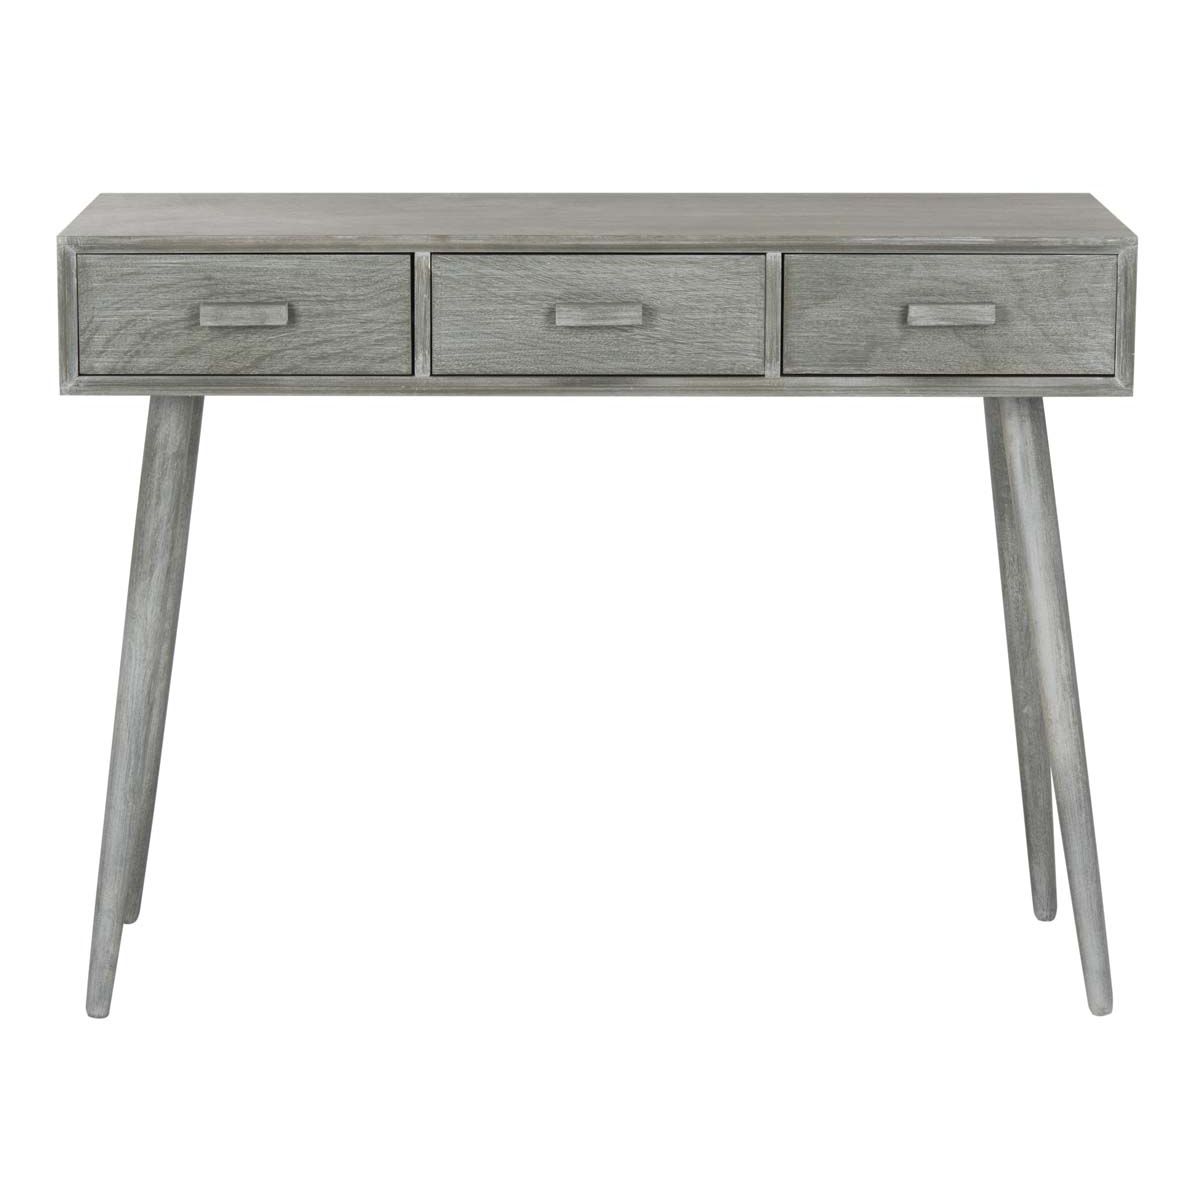 Safavieh Albus 3 Drawer Console Table , CNS5701 - Slate Grey